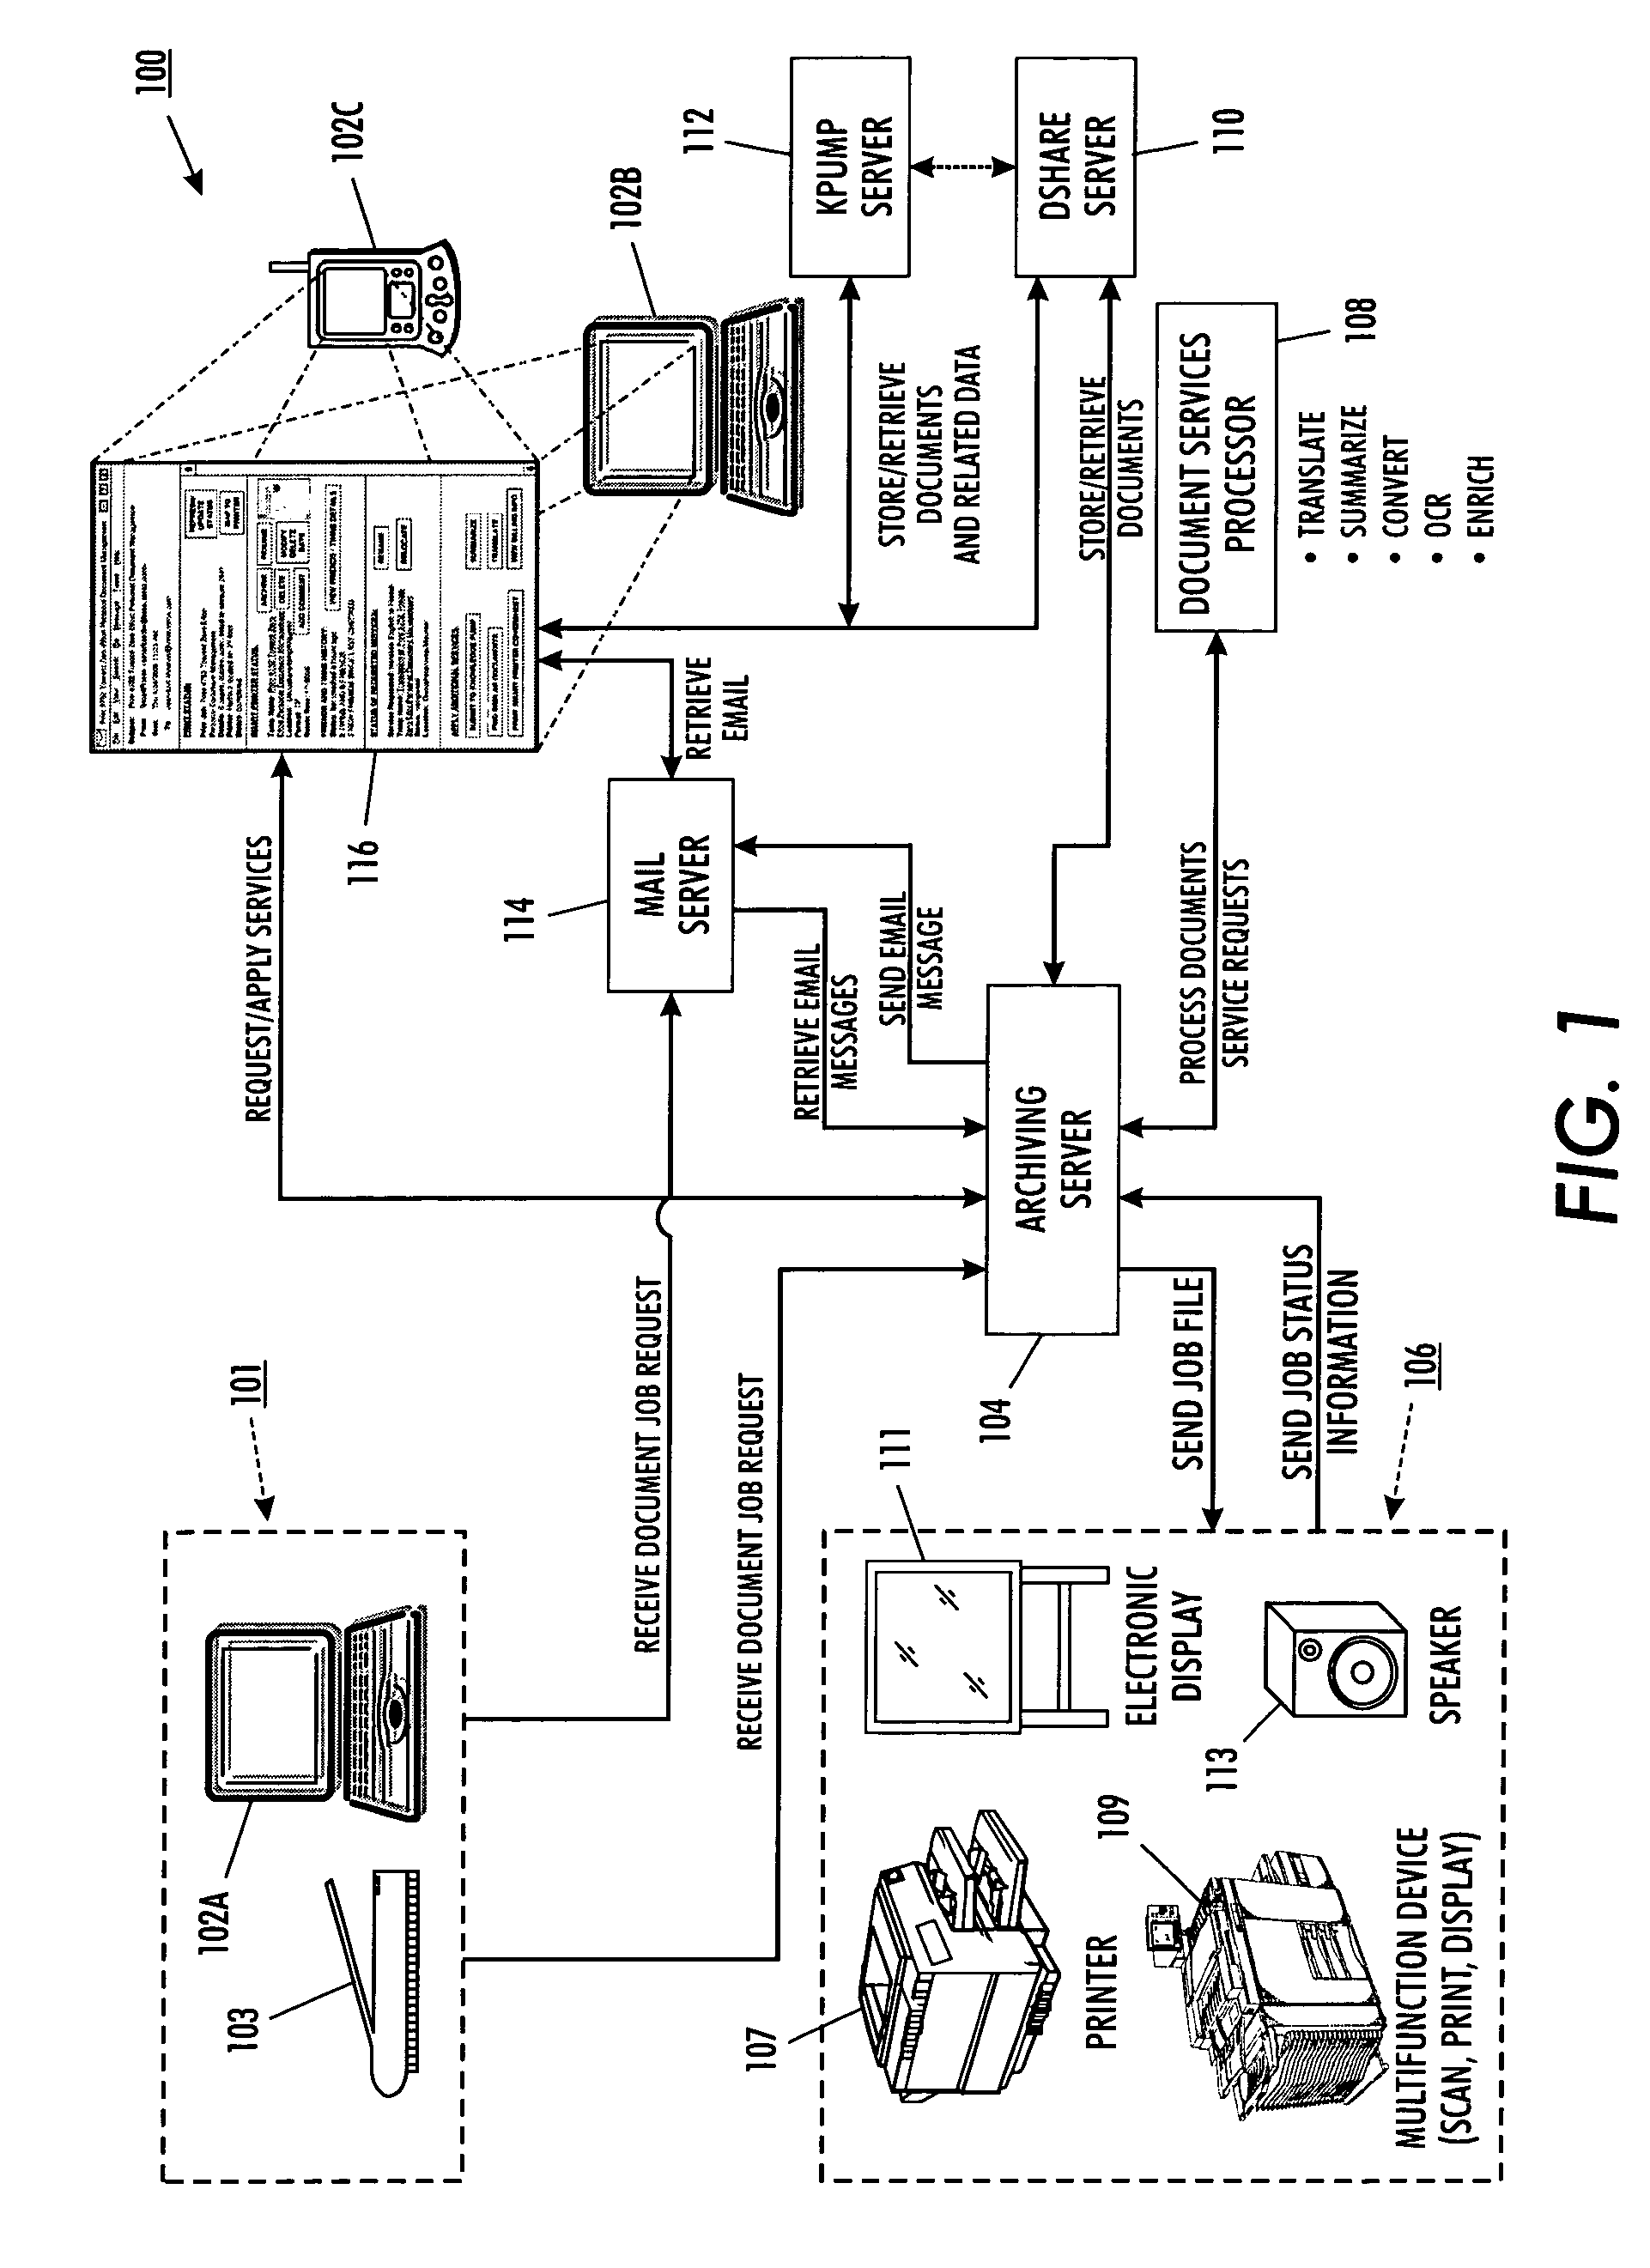 Output job request electronic message notification system and method